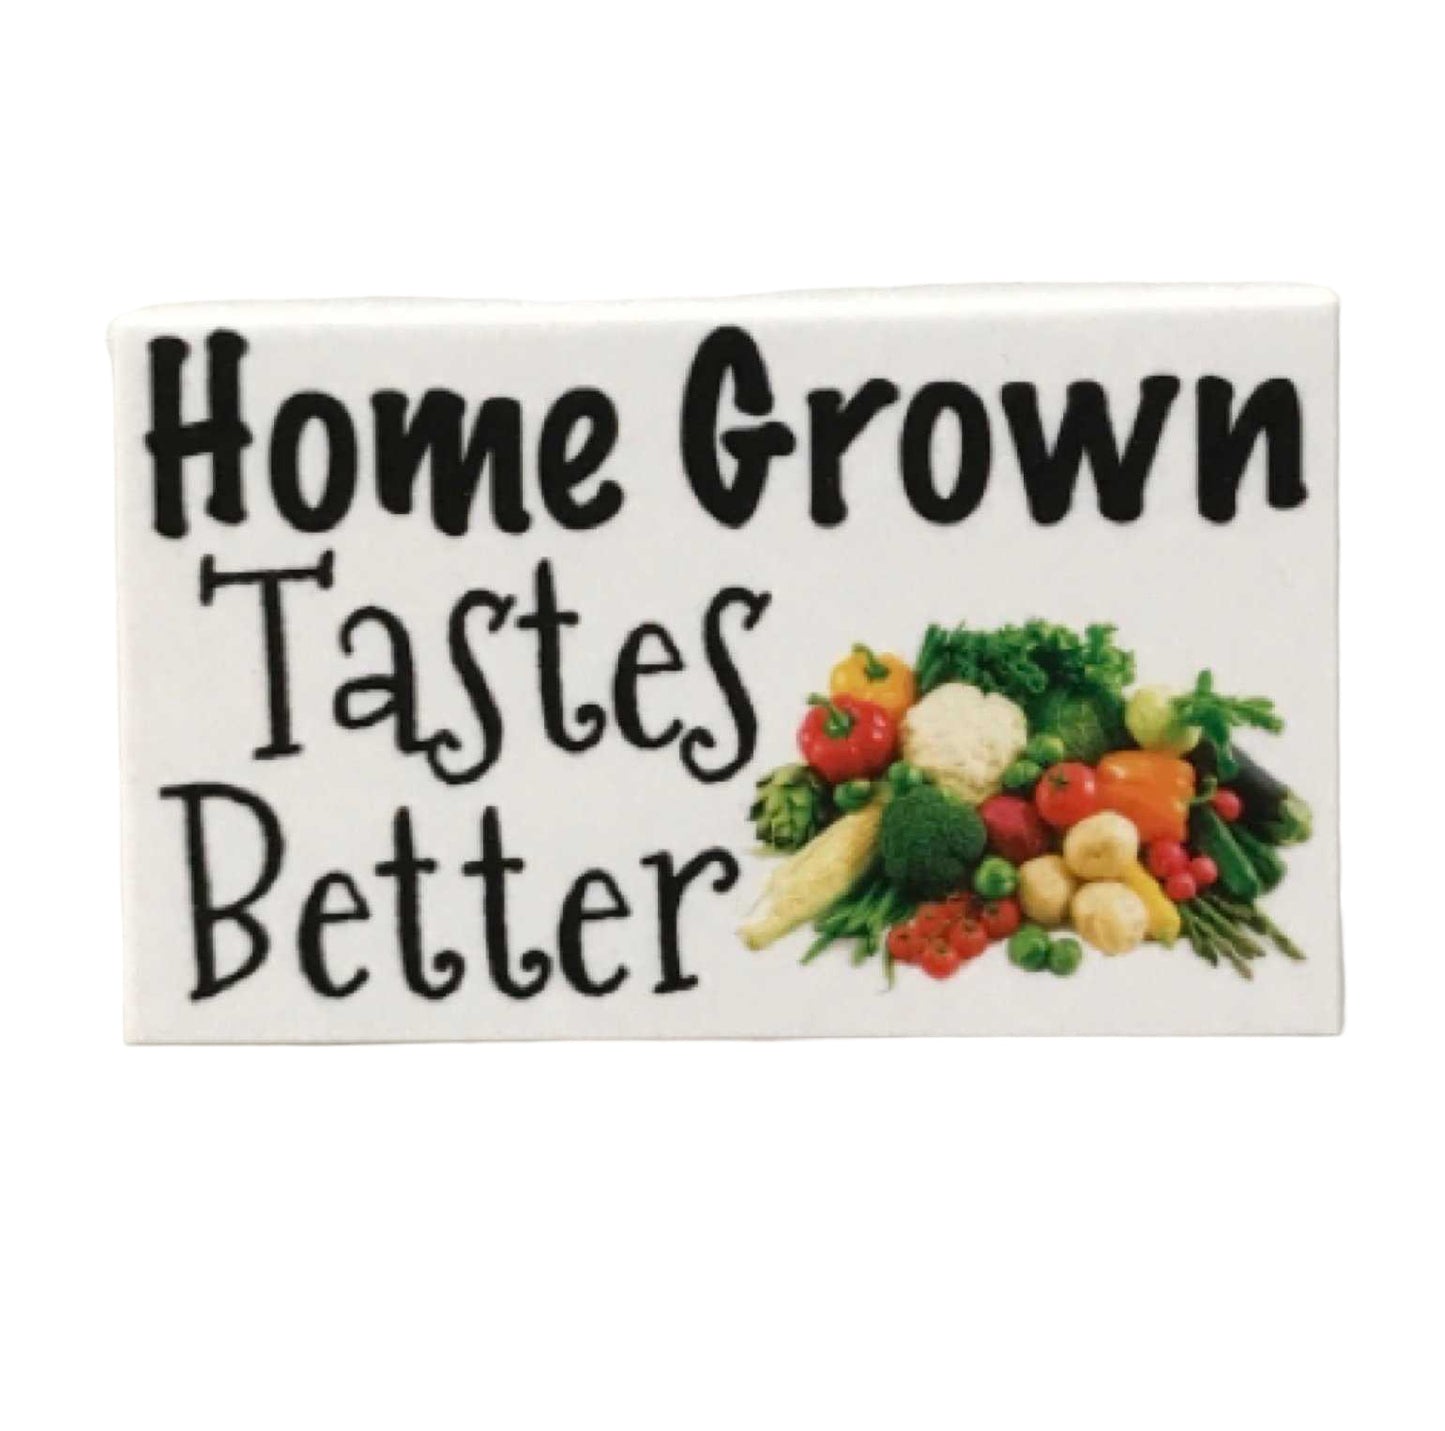 Home Grown Tastes Better Vegetables Garden Sign - The Renmy Store Homewares & Gifts 